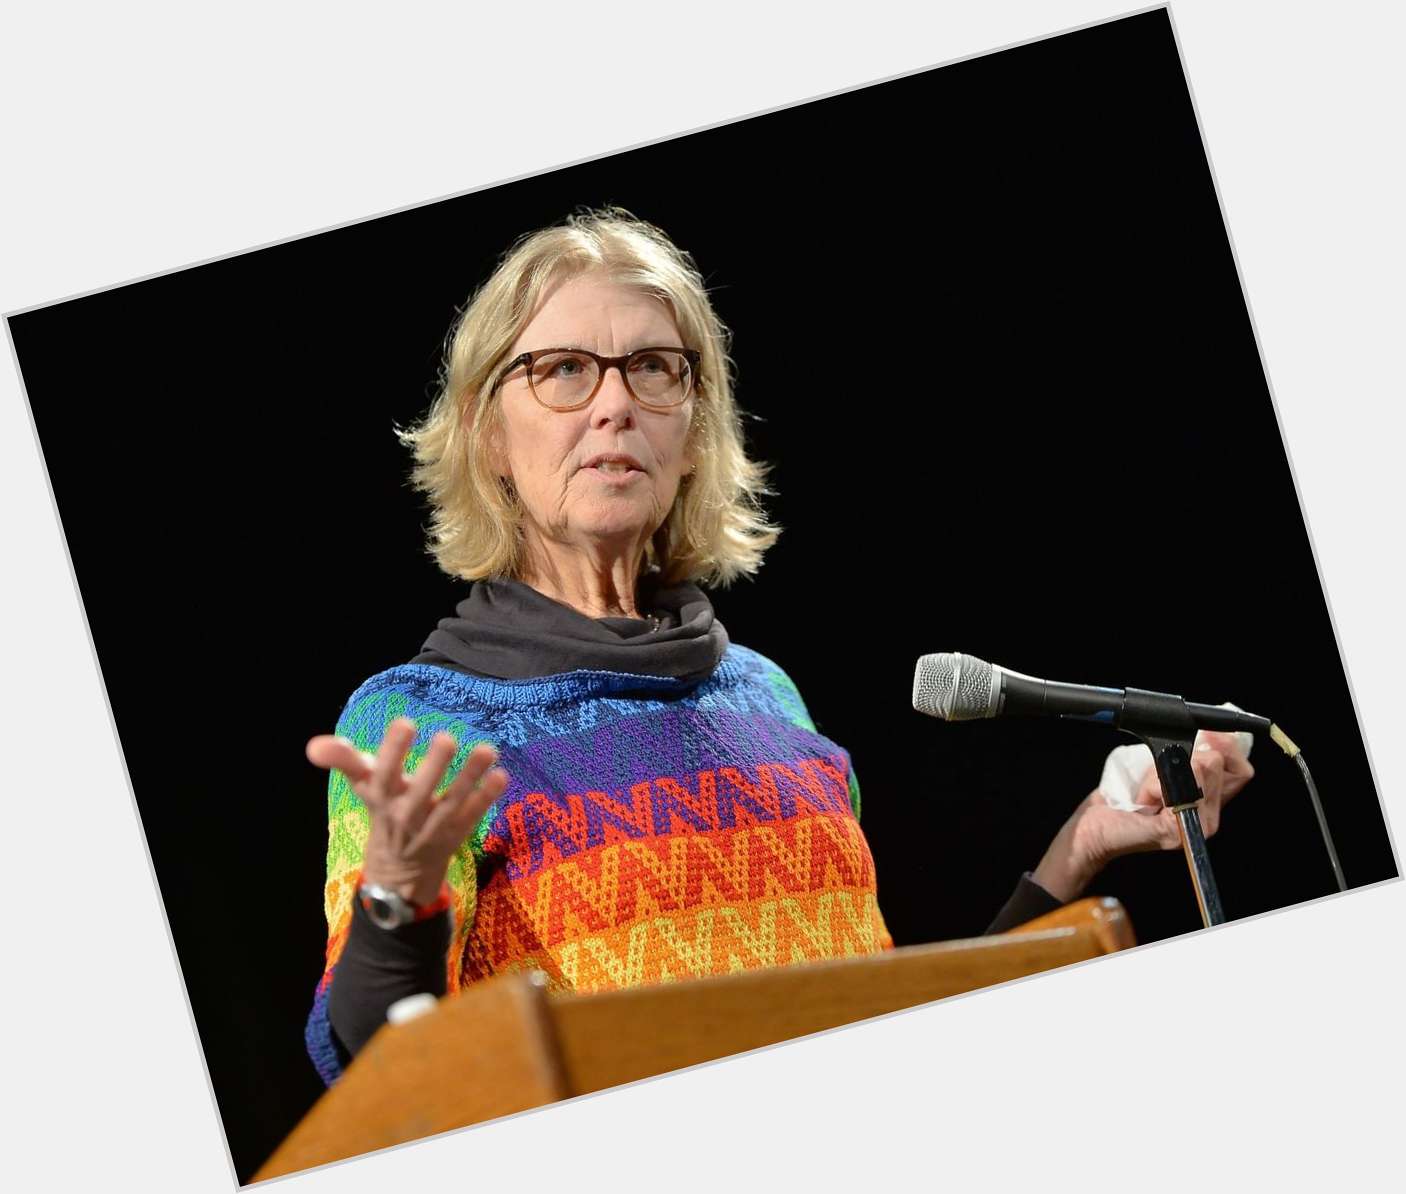 <a href="/hot-women/jane-smiley/where-dating-news-photos">Jane Smiley</a>  